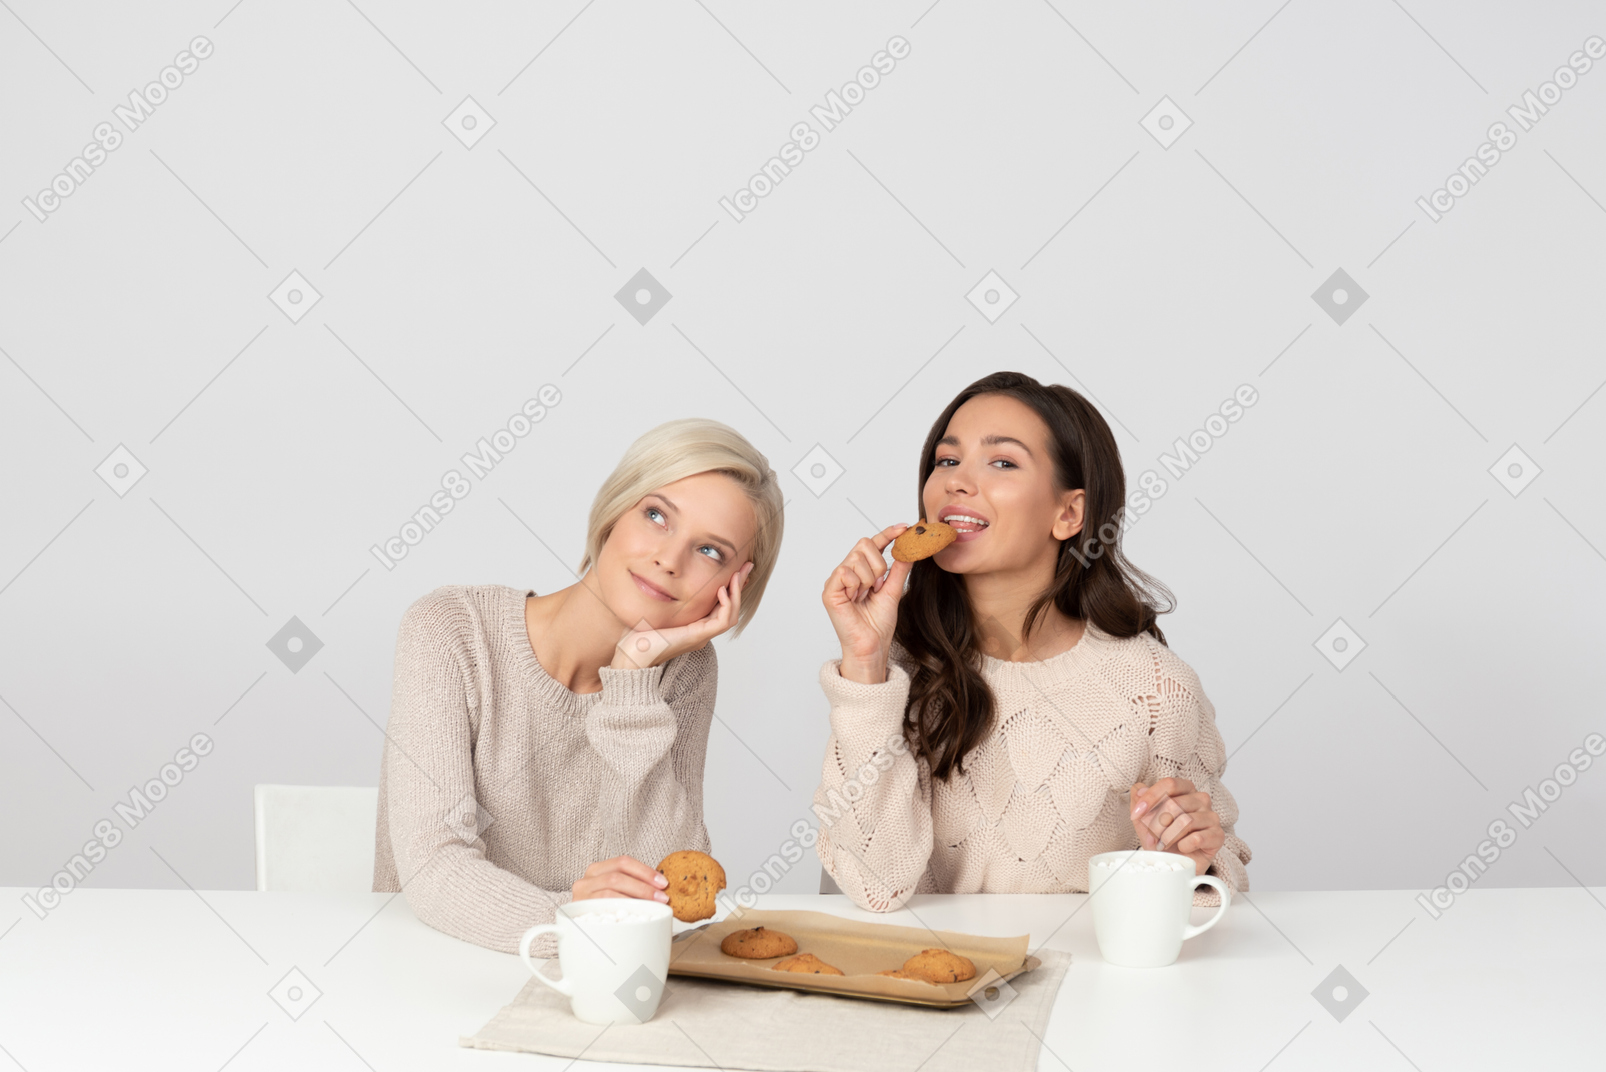 Young women eating homemade cookies and drinking coffee